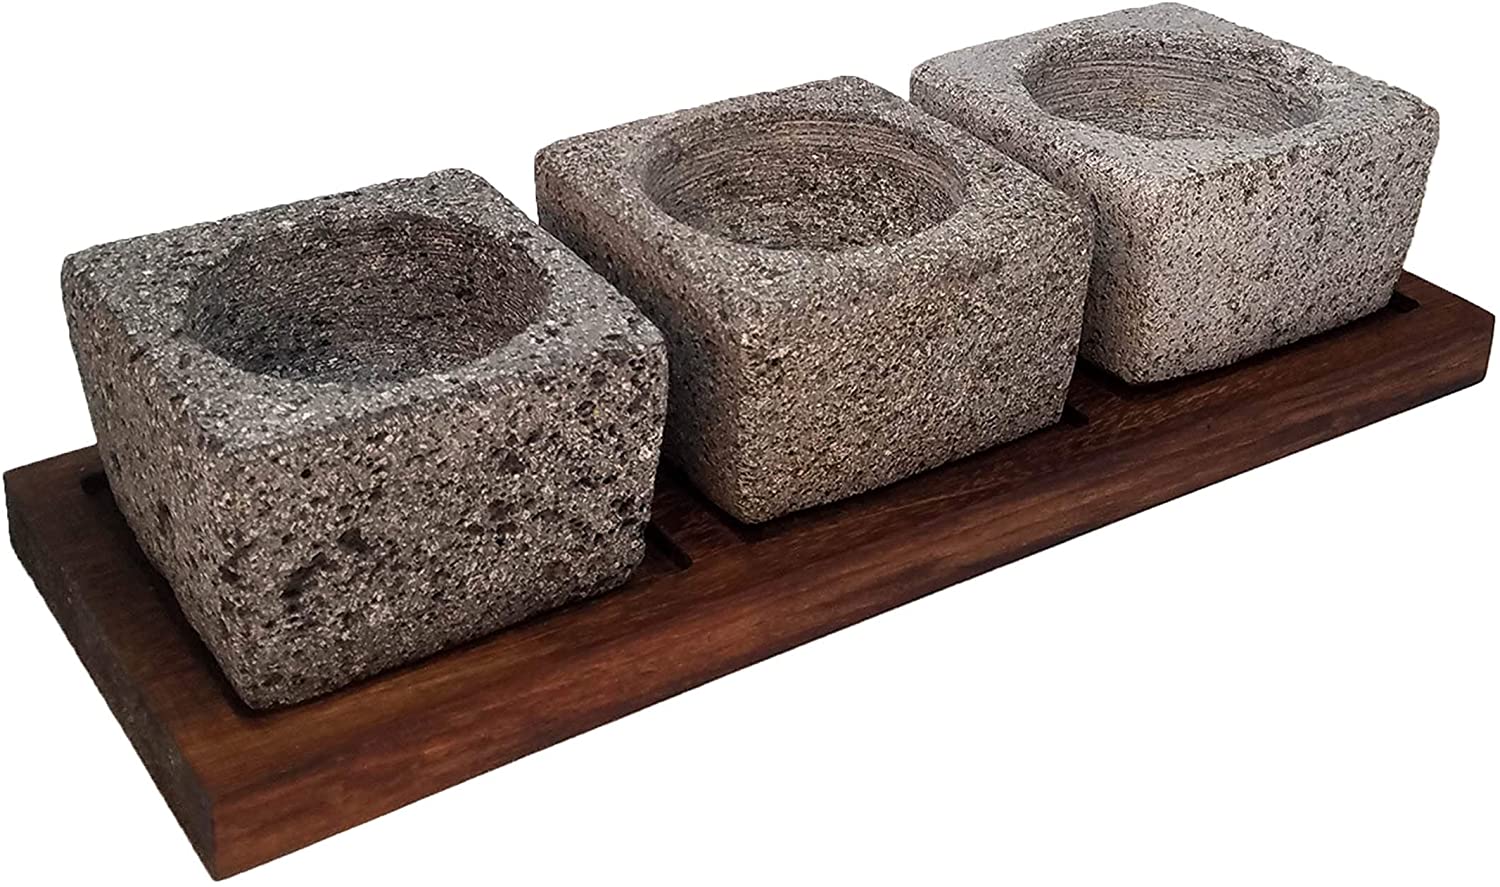 VOLCANIC ROCK PRODUCTS / Set-of-3-Small-4''-Mortars-with-Parota-Wood-Serving-Board